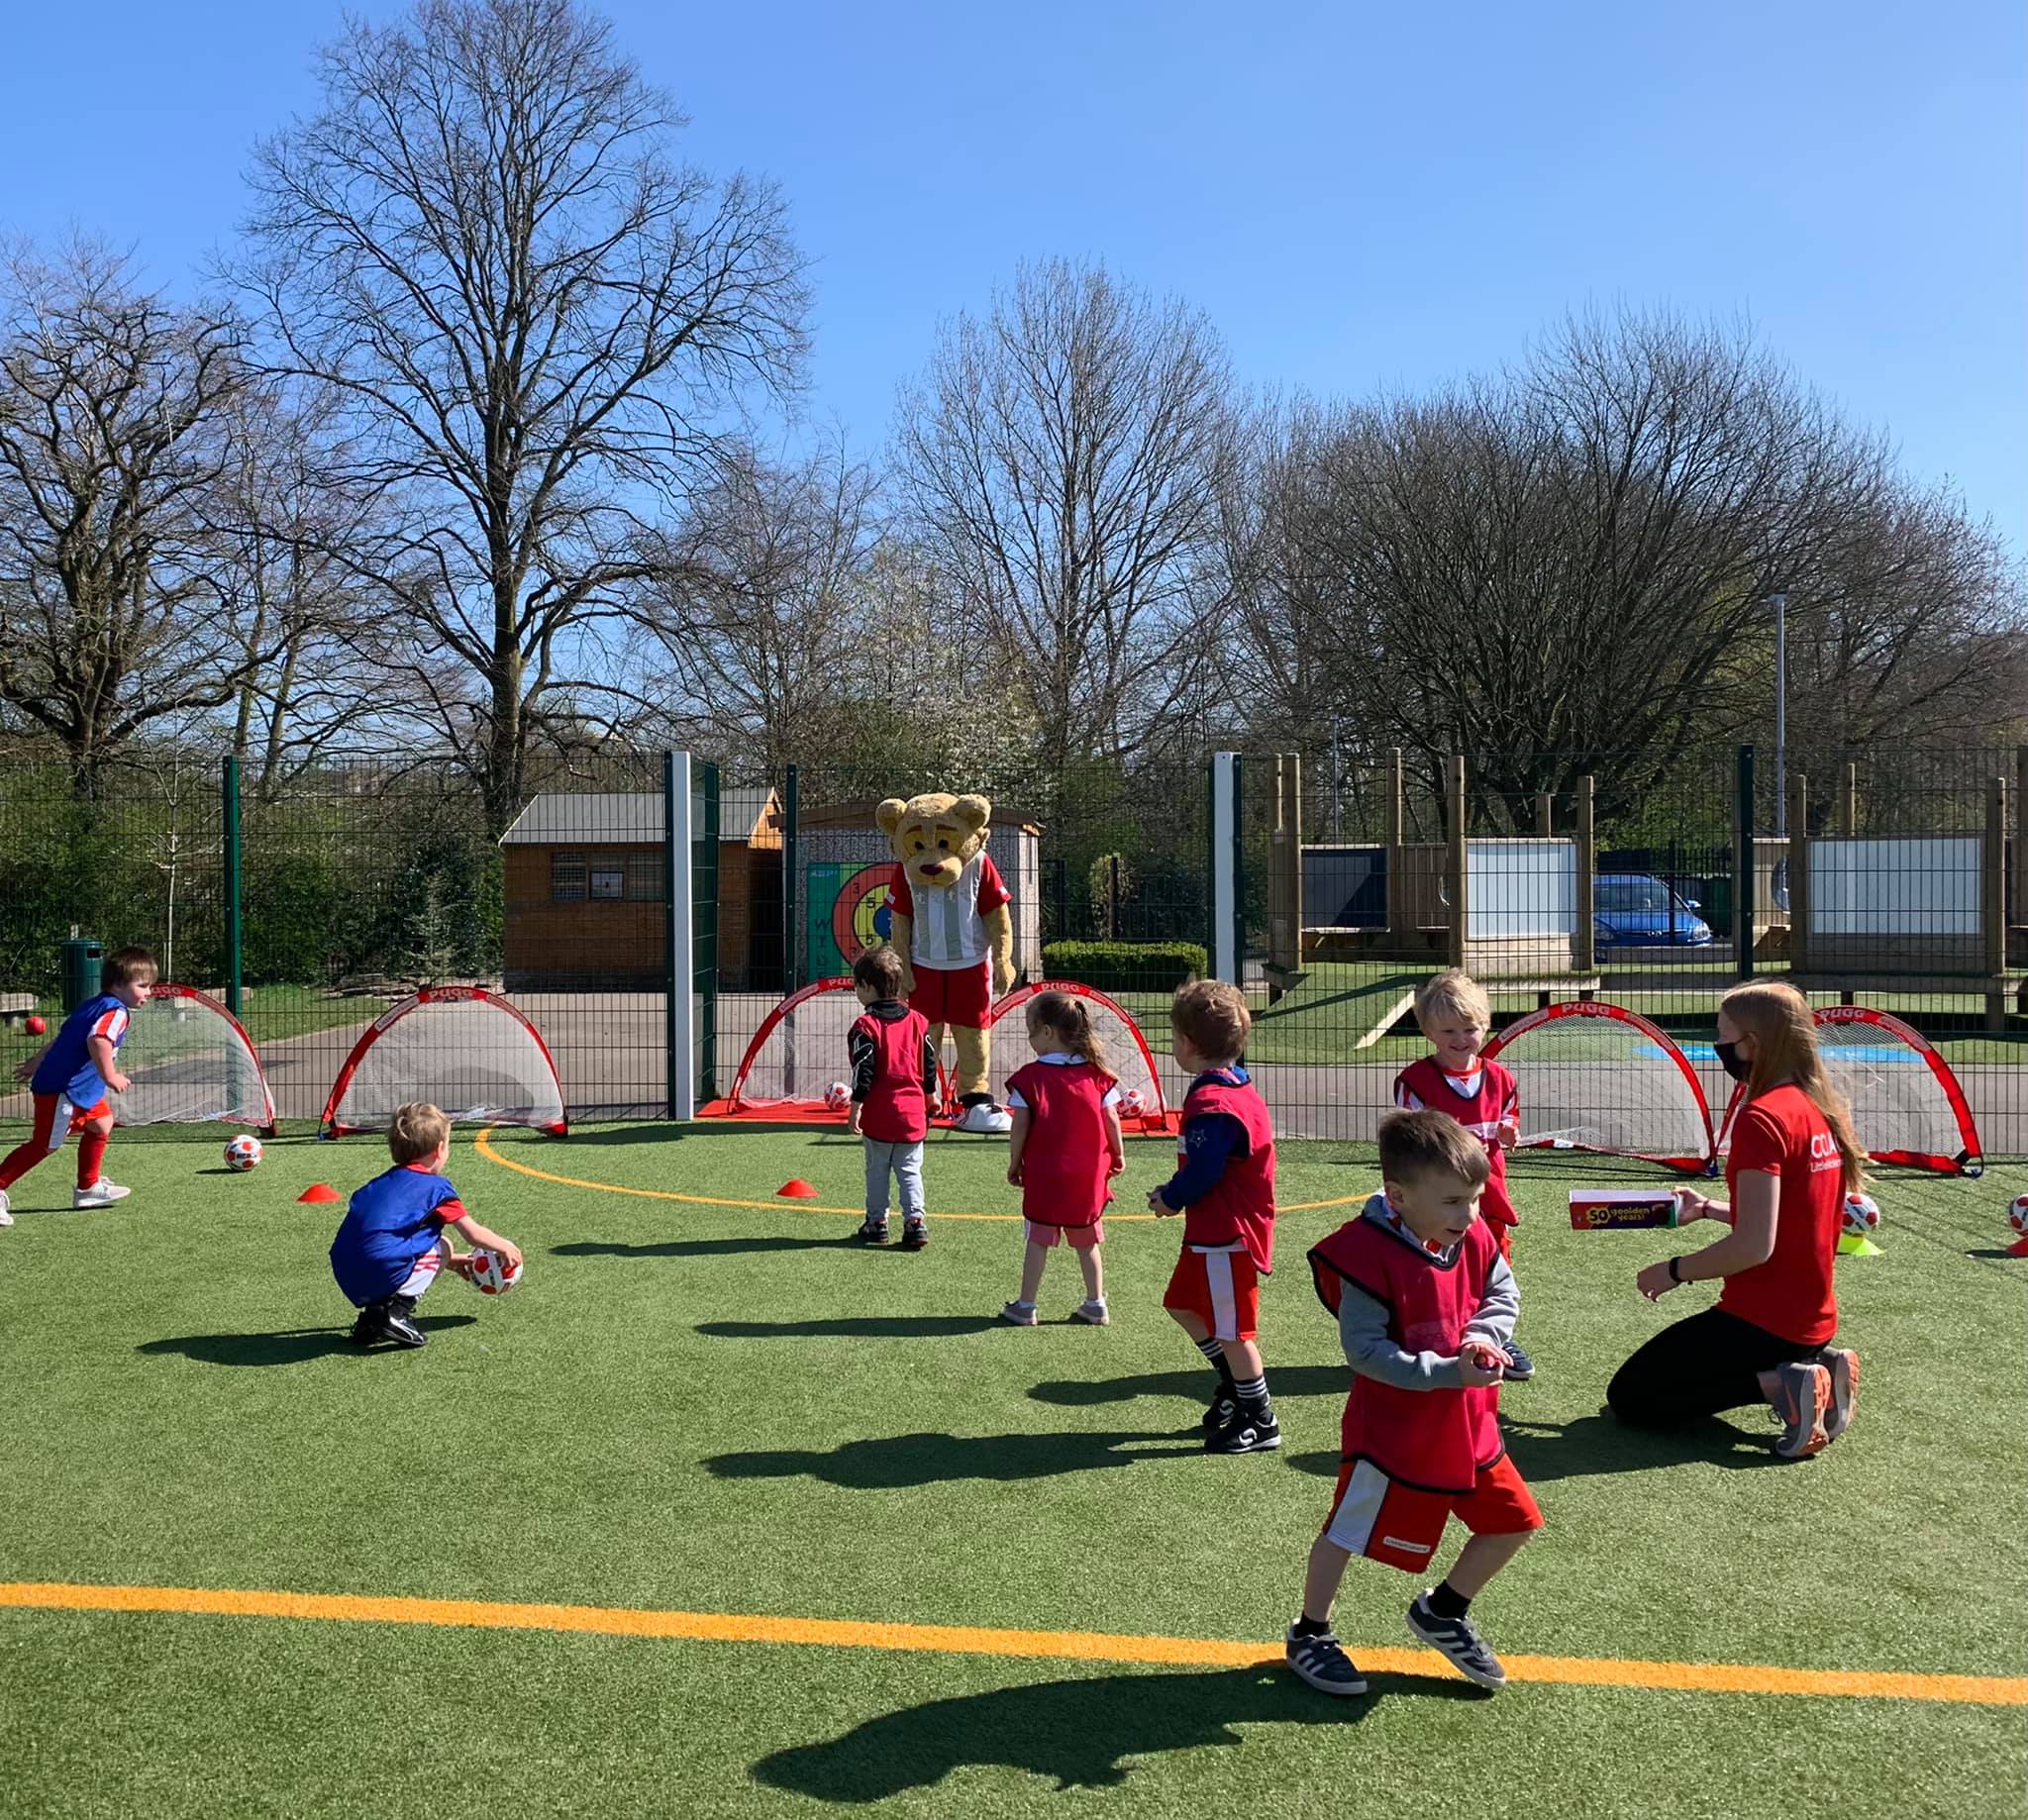 Little Kickers – South Norwood – Outside Croydon Sports Arena. 2 FREE TRIALS AVAILABLE!